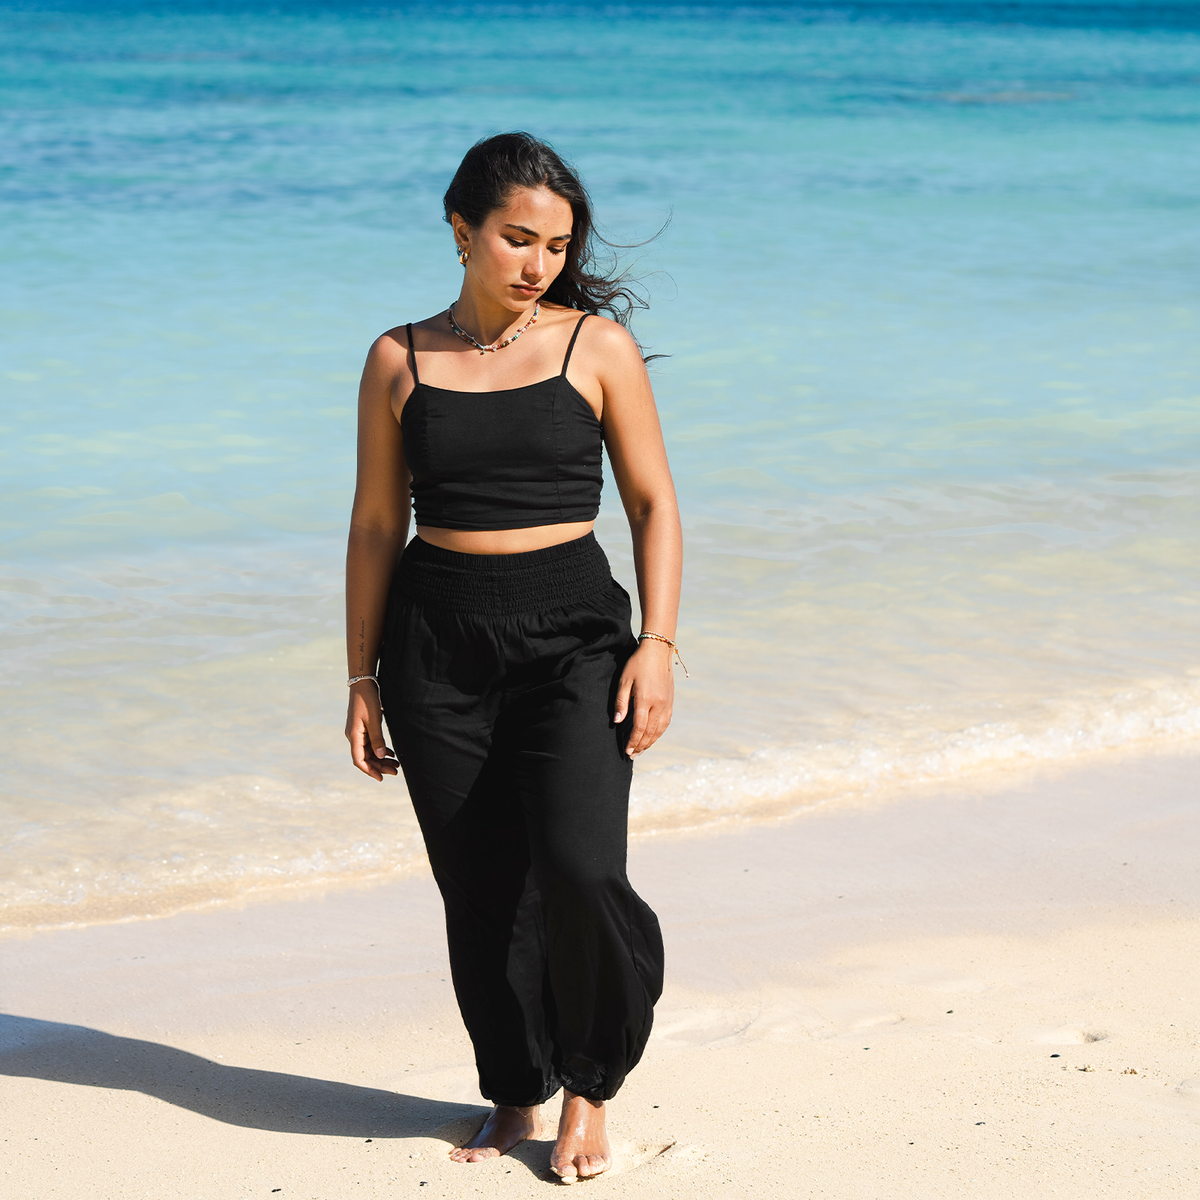 Model standing on the beach wearing black harem pants and a black rayon tank top